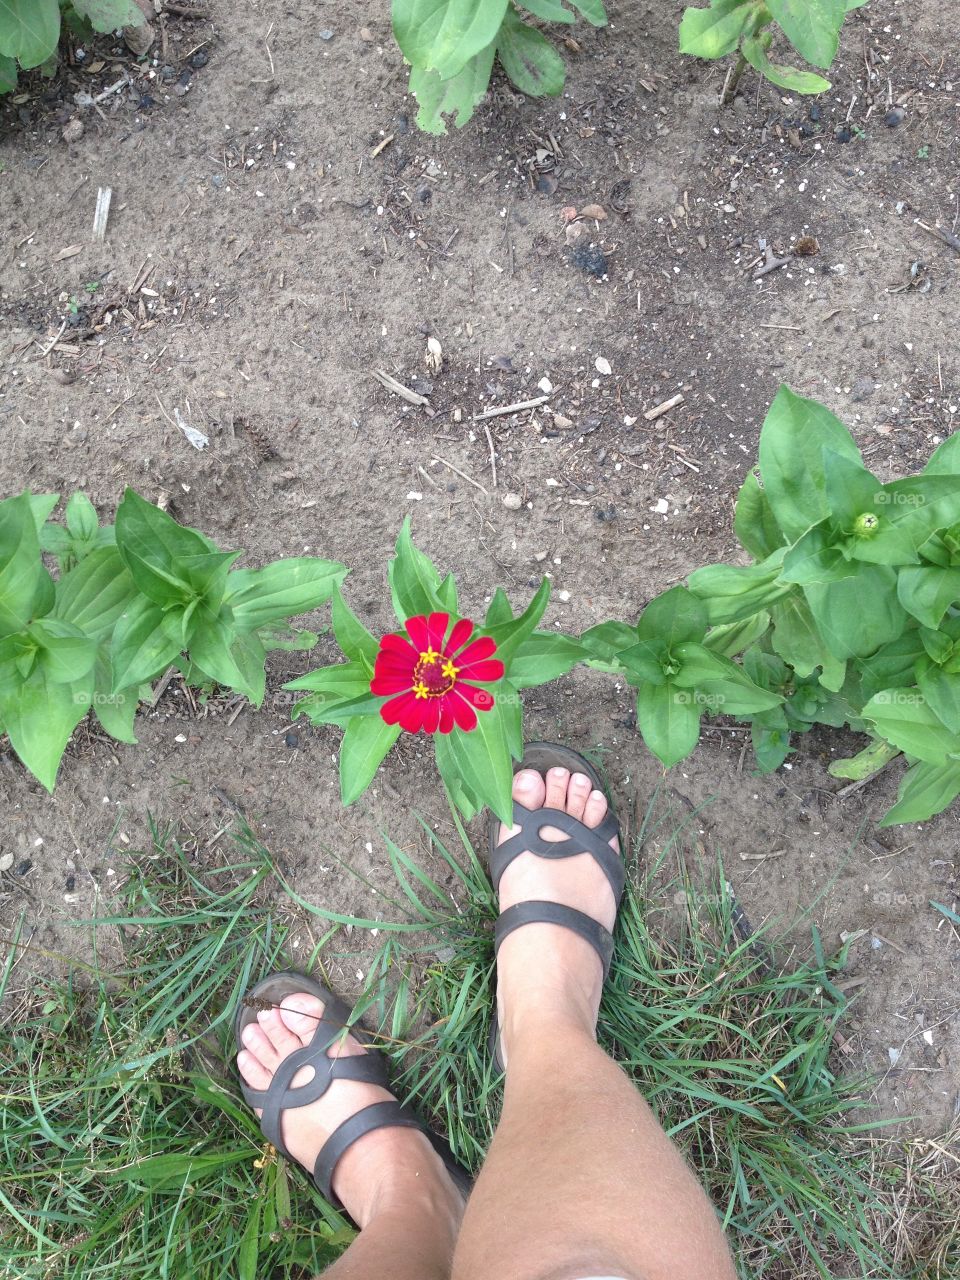 From where I stand, I see zinnias that need to be picked.  